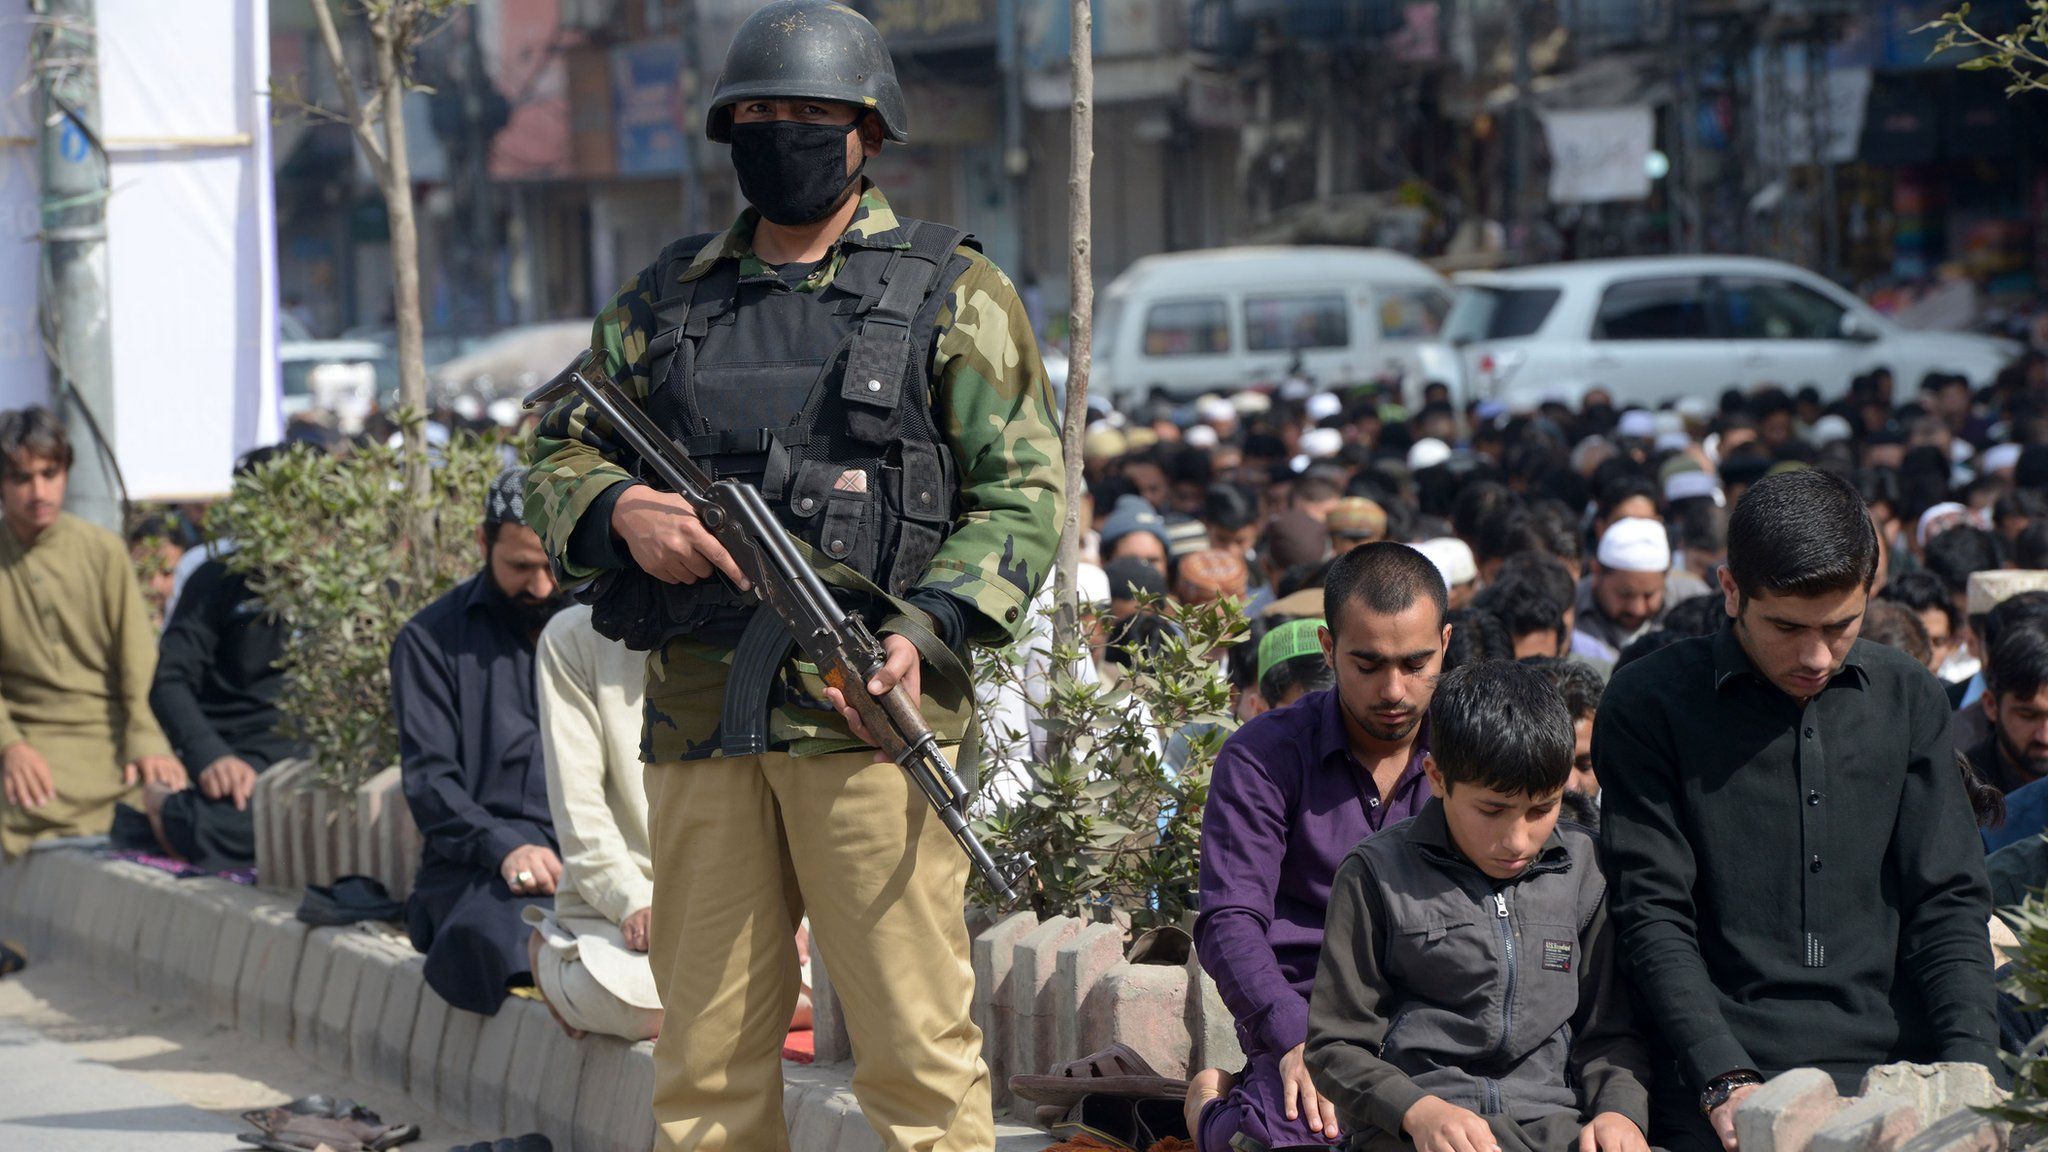 A Pakistani policeman stands guard as Muslim offer Friday prayers on a street in Peshawar on February 17, 2017, following bomb attack on a shrine of 13th century Muslim Sufi saint Lal Shahbaz Qalandar in the town of Sehwan in Sindh province, some 200 kilometres north-east of the provincial capital Karachi.